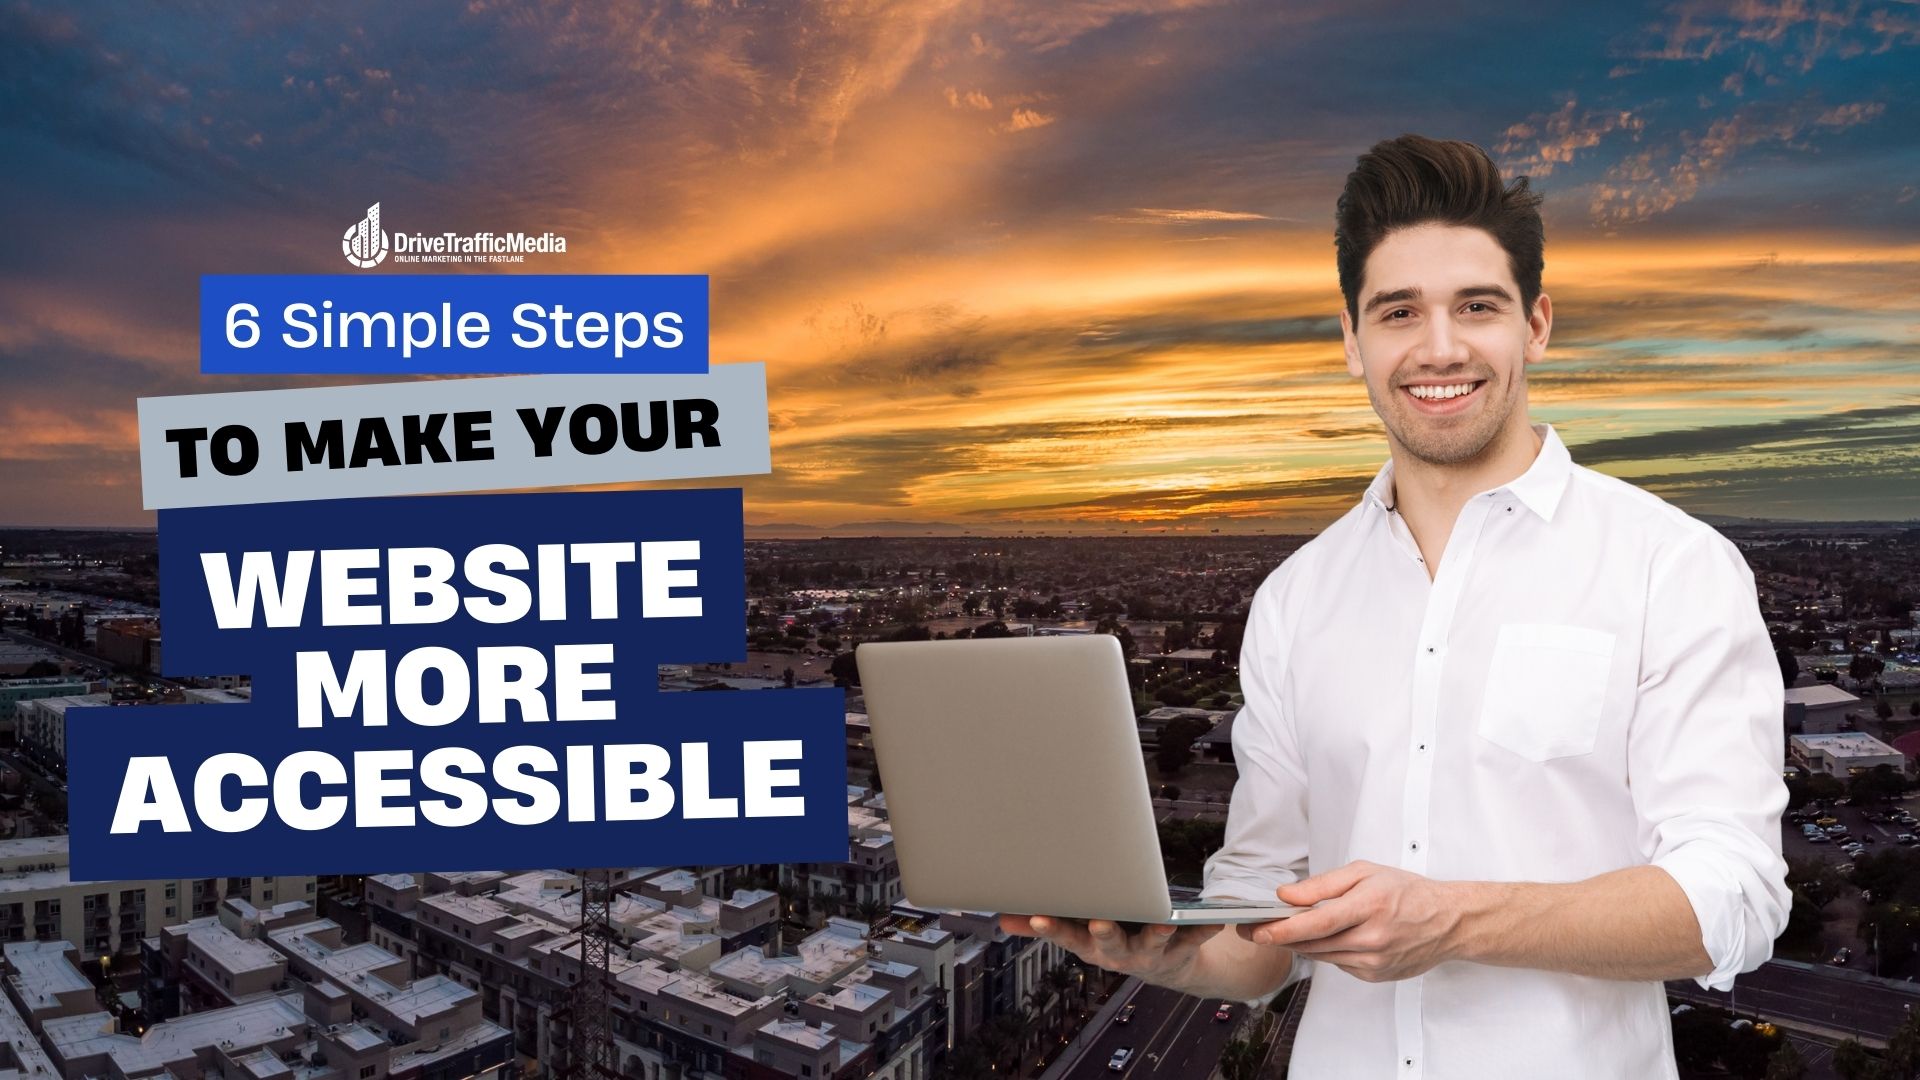 orange-county-web-design-experts-share-tips-on-how-to-make-your-website-more-accessible